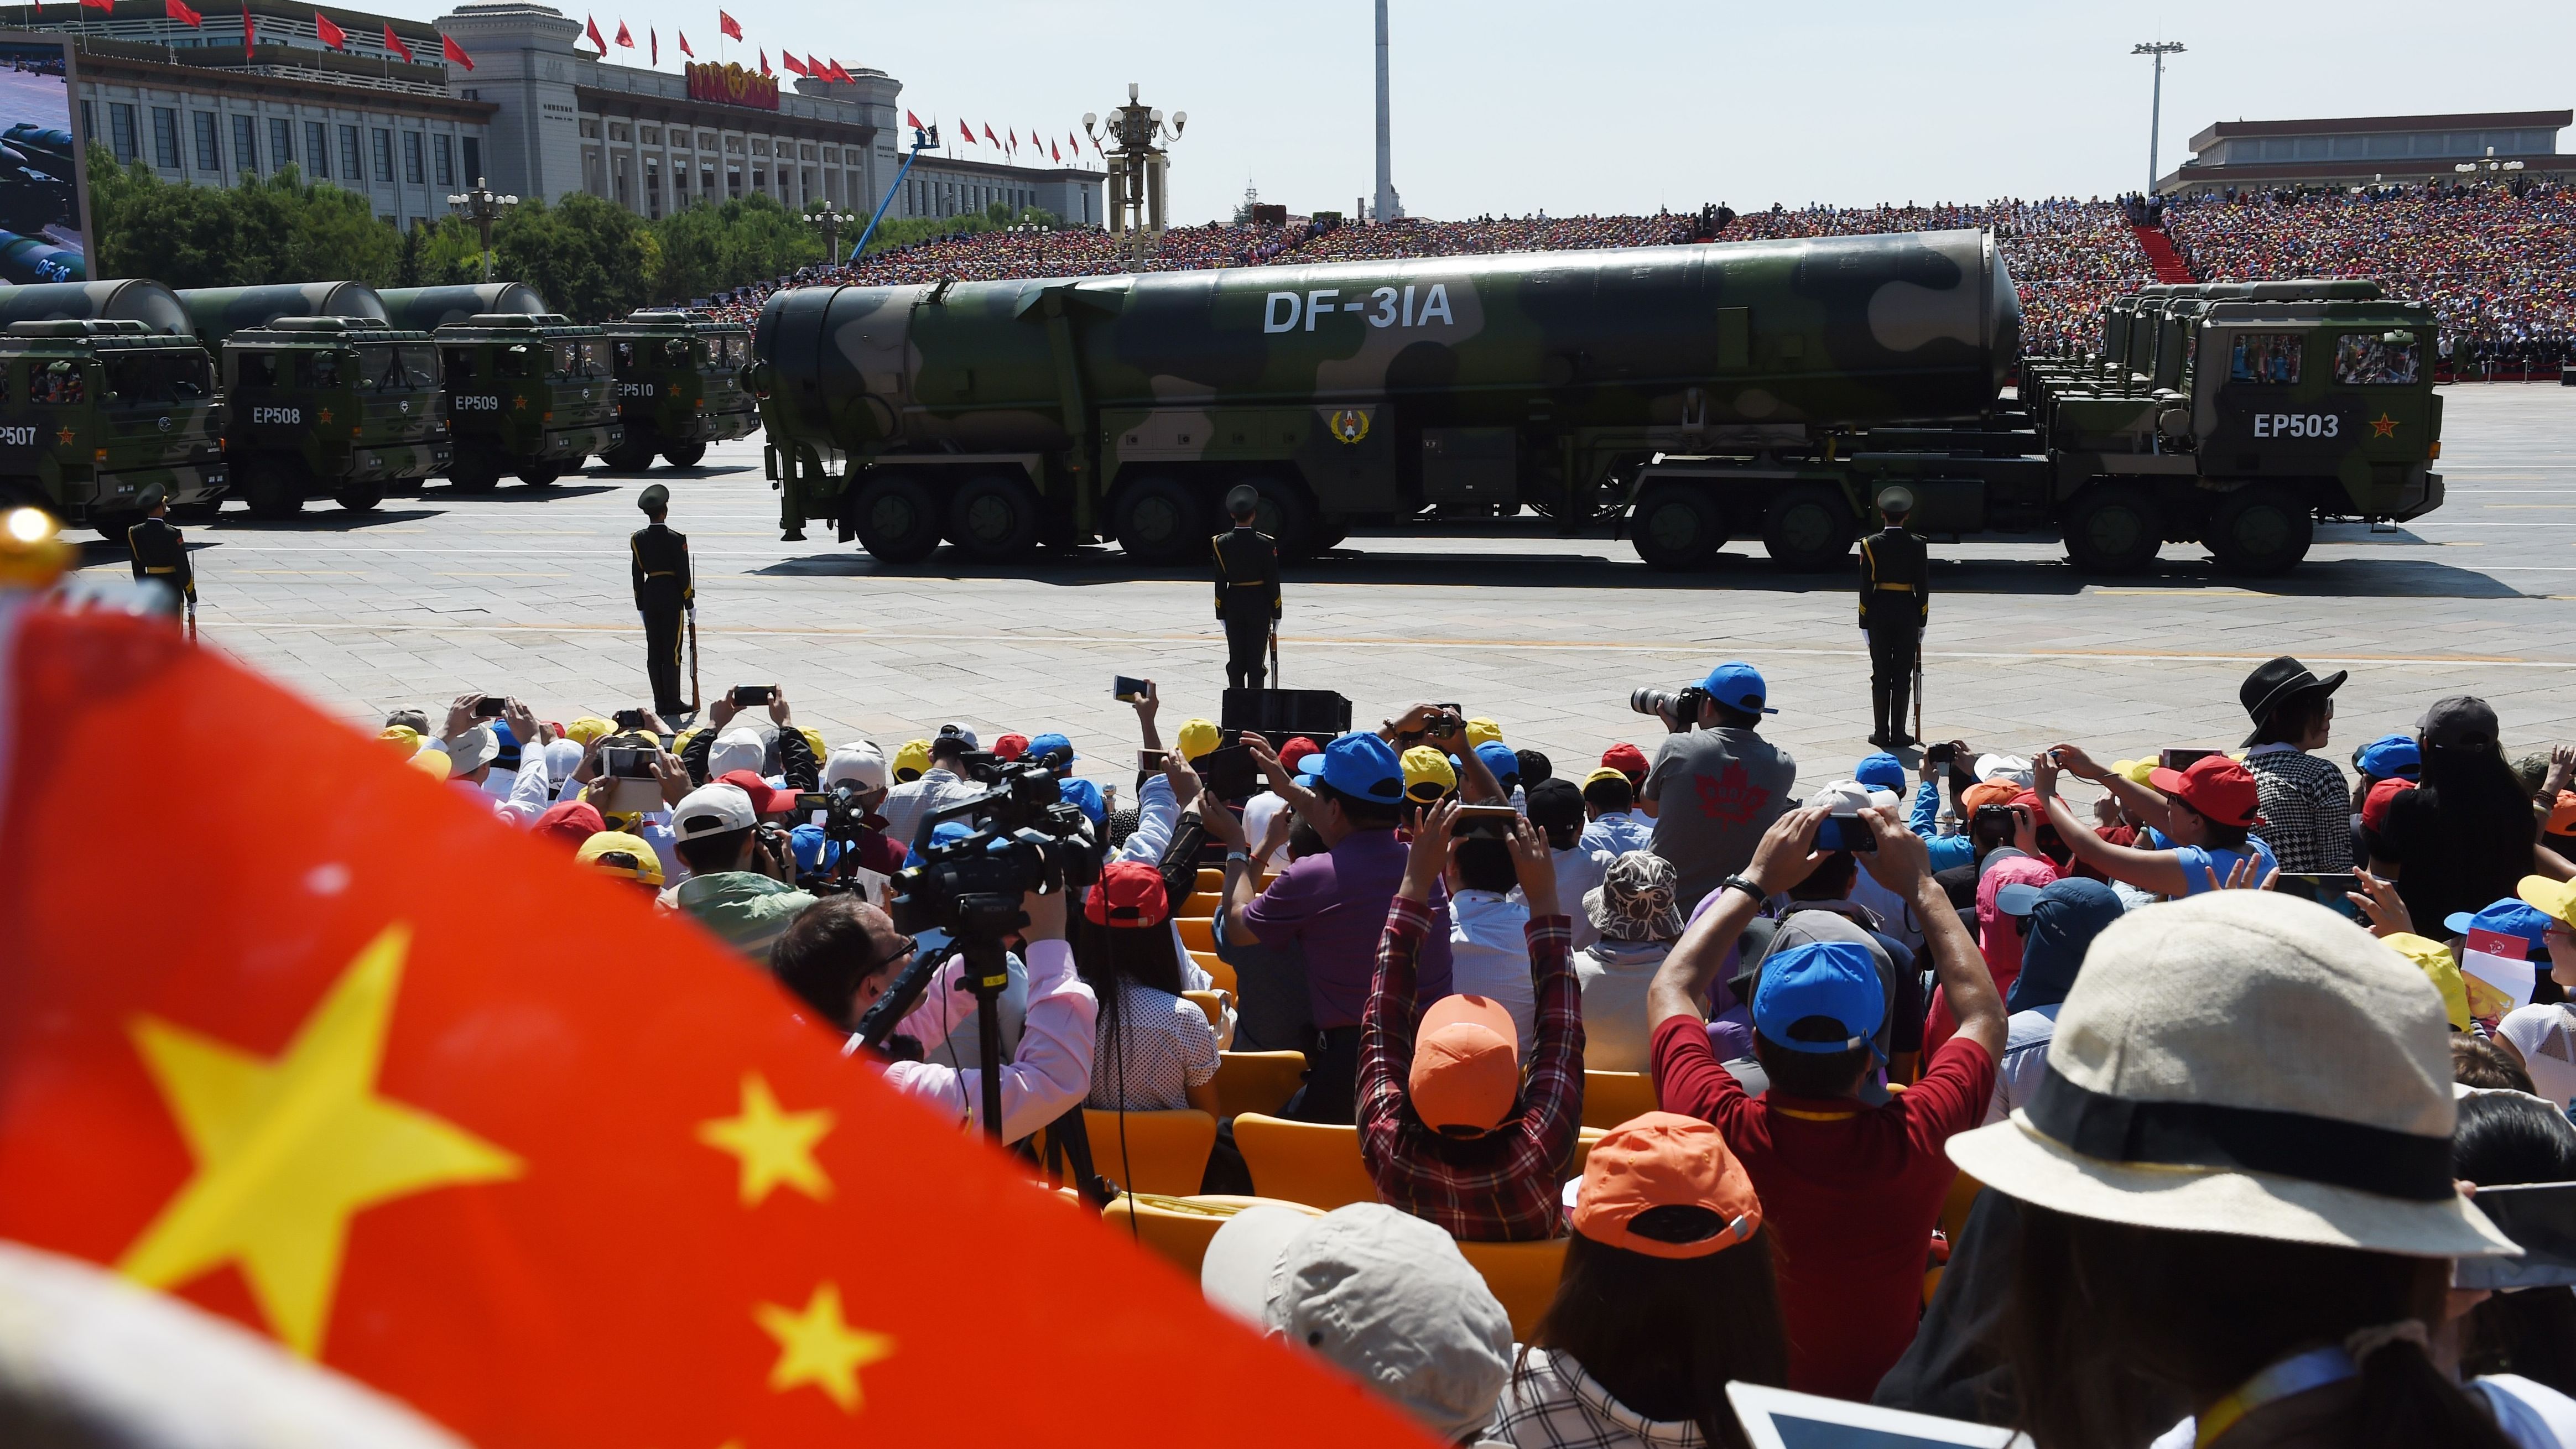 Military vehicles carrying DF-31A missiles are displayed in a military parade at Tiananmen Square in Beijing on September 3, 2015.